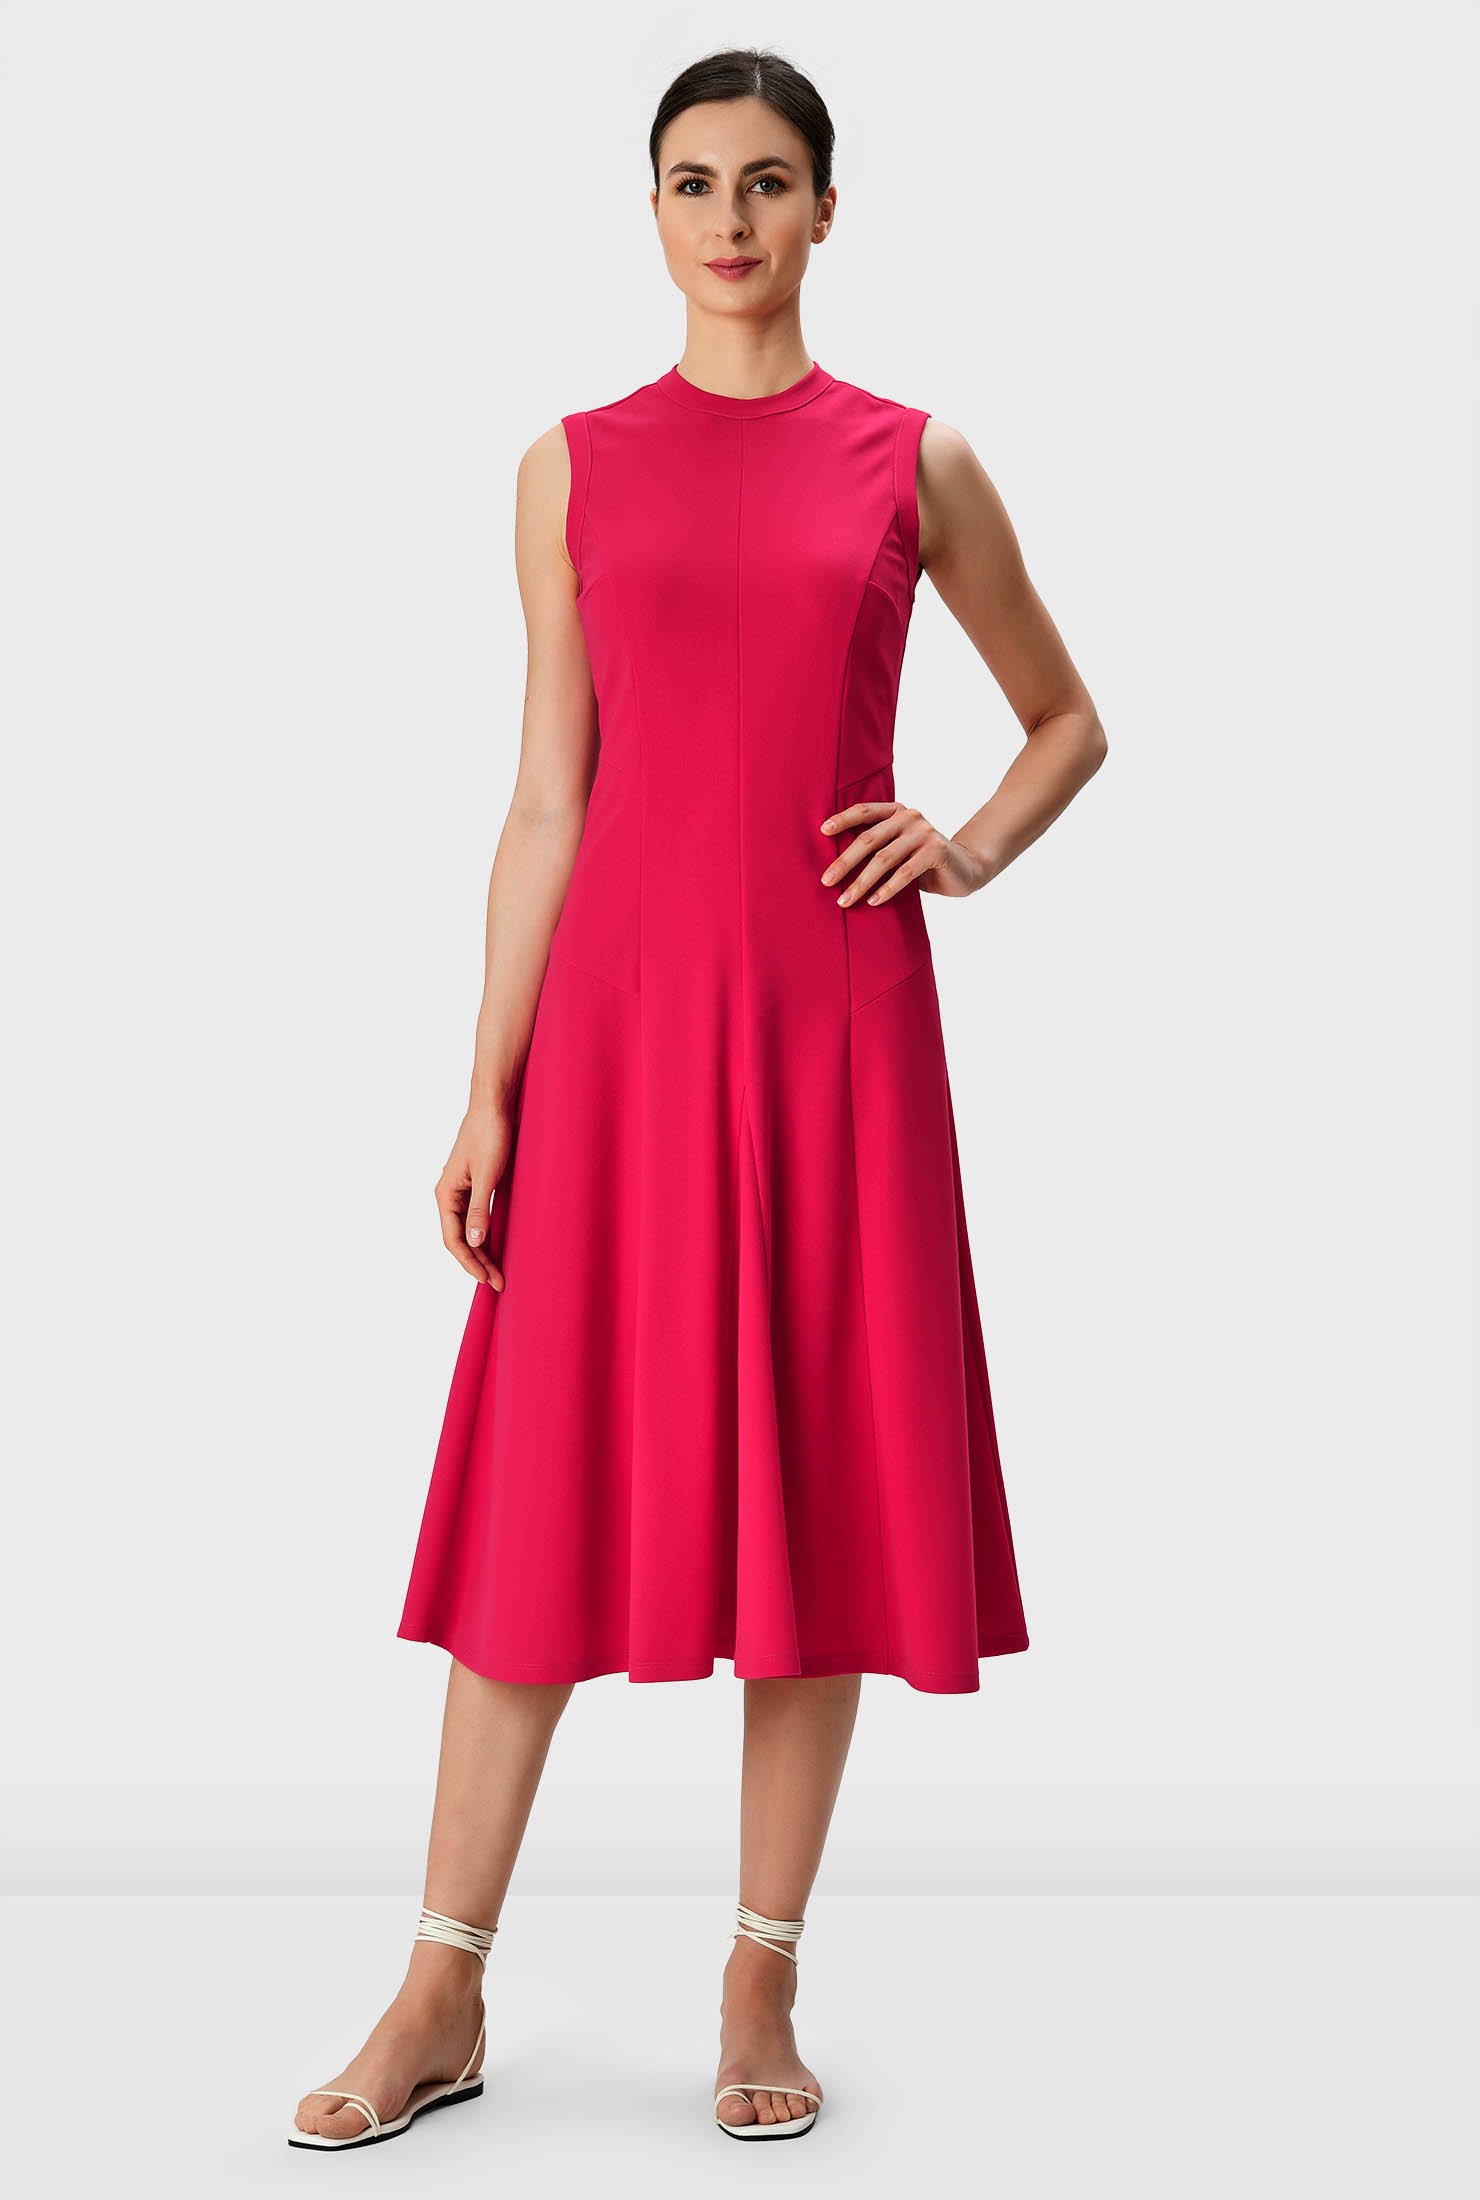 Polished yet relaxed in elegantly fluid jersey, our shaped crepe knit dress in flattering seamed and segmented panels is cinched in at the side with an asymmetric seamed waist.